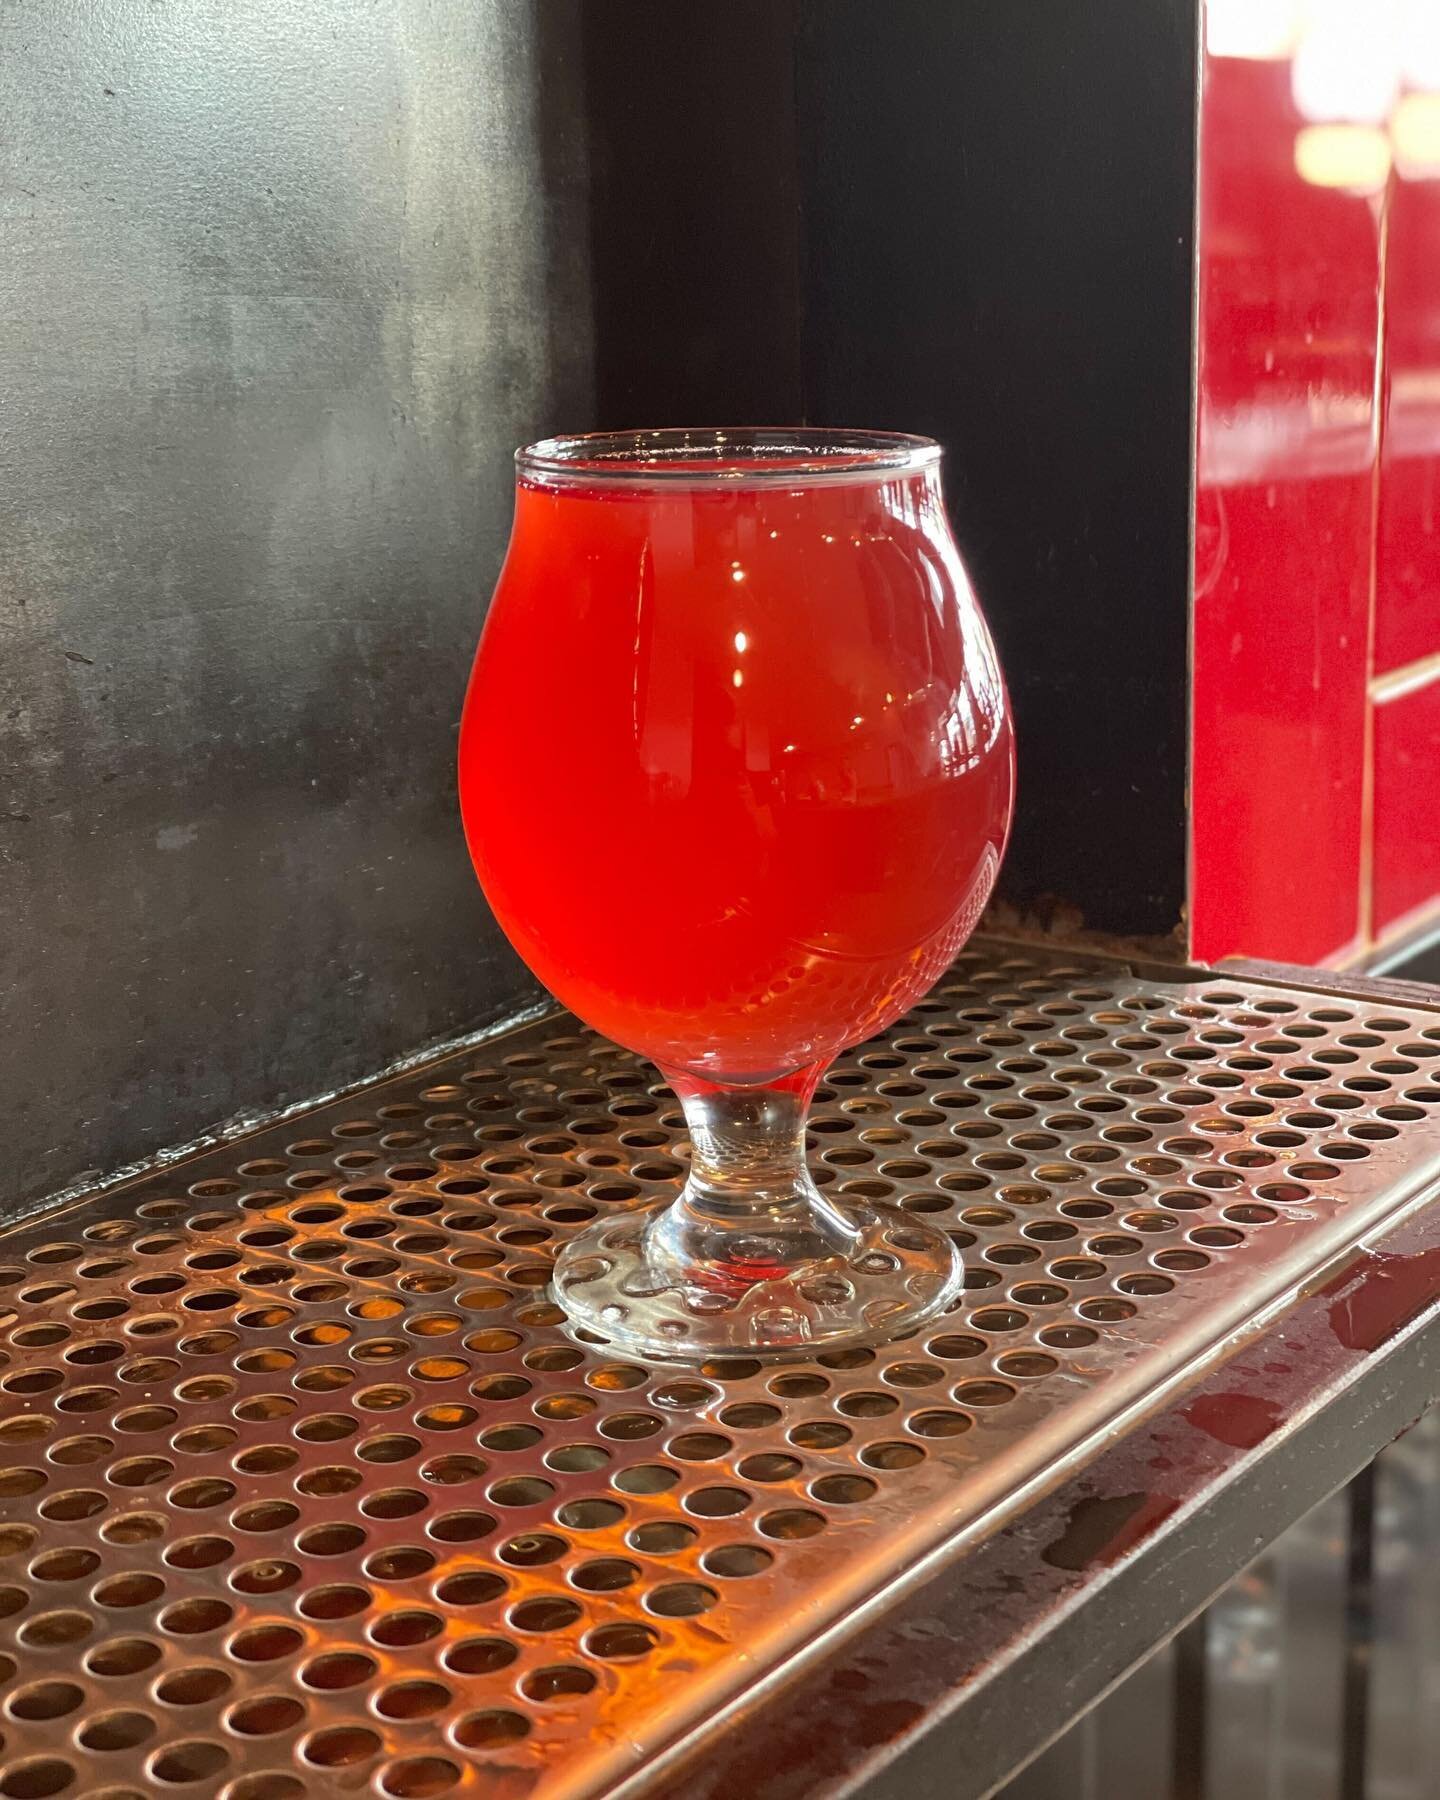 🚨 New Beer Alert 🚨

&bull;Available at the Lincoln location&bull;

Dragon Chromatic
Fruited Sour

ABV - 5% // IBU - 2

Another iteration of our Kaleidoscope fruited sour series, this rich pink-red-hued beer is bursting with tropical fruit flavor. C